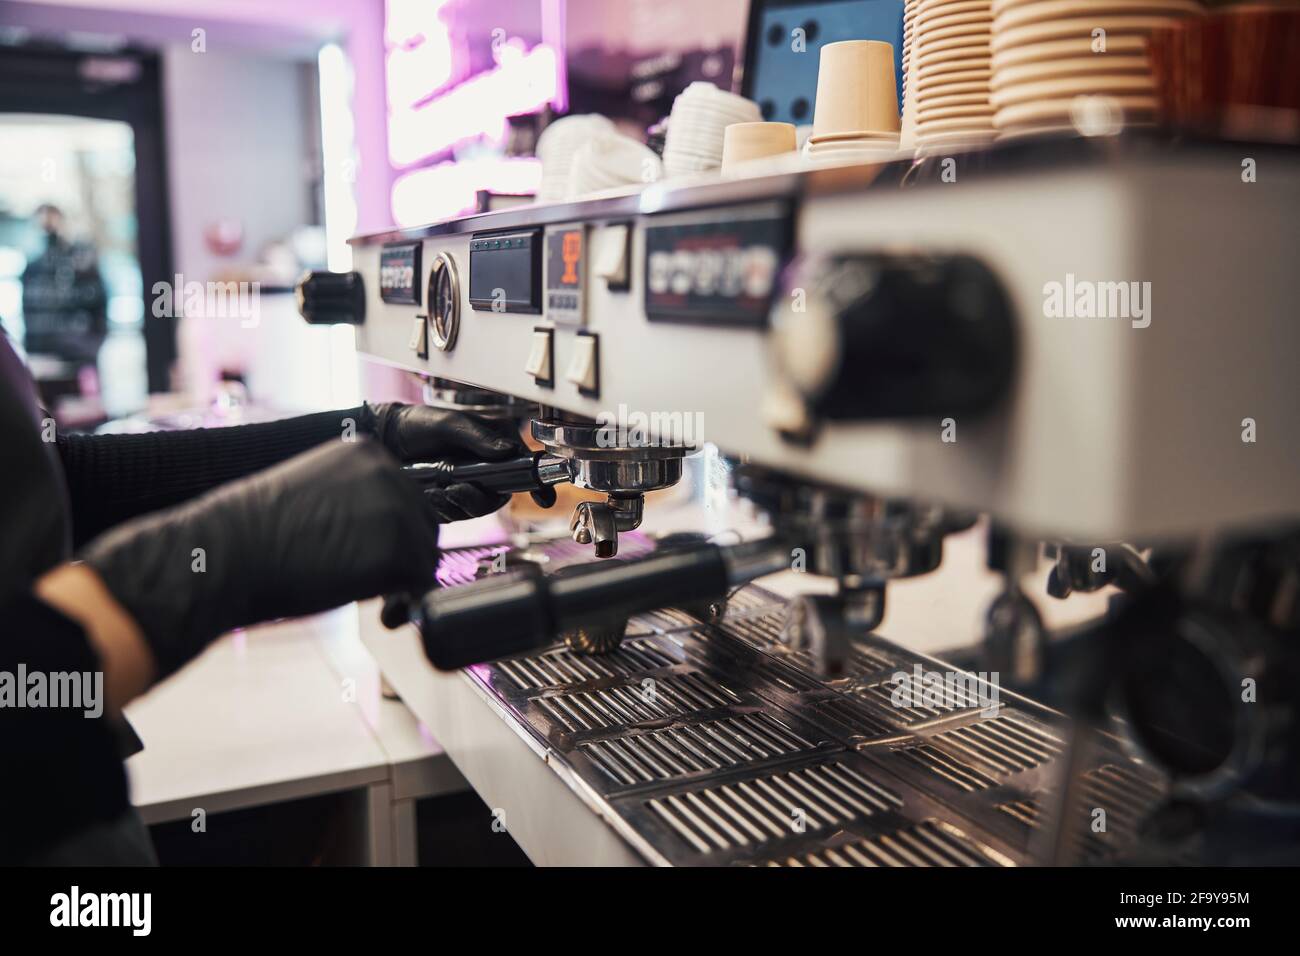 Busy barista operating a modern coffee machine at cafe Stock Photo